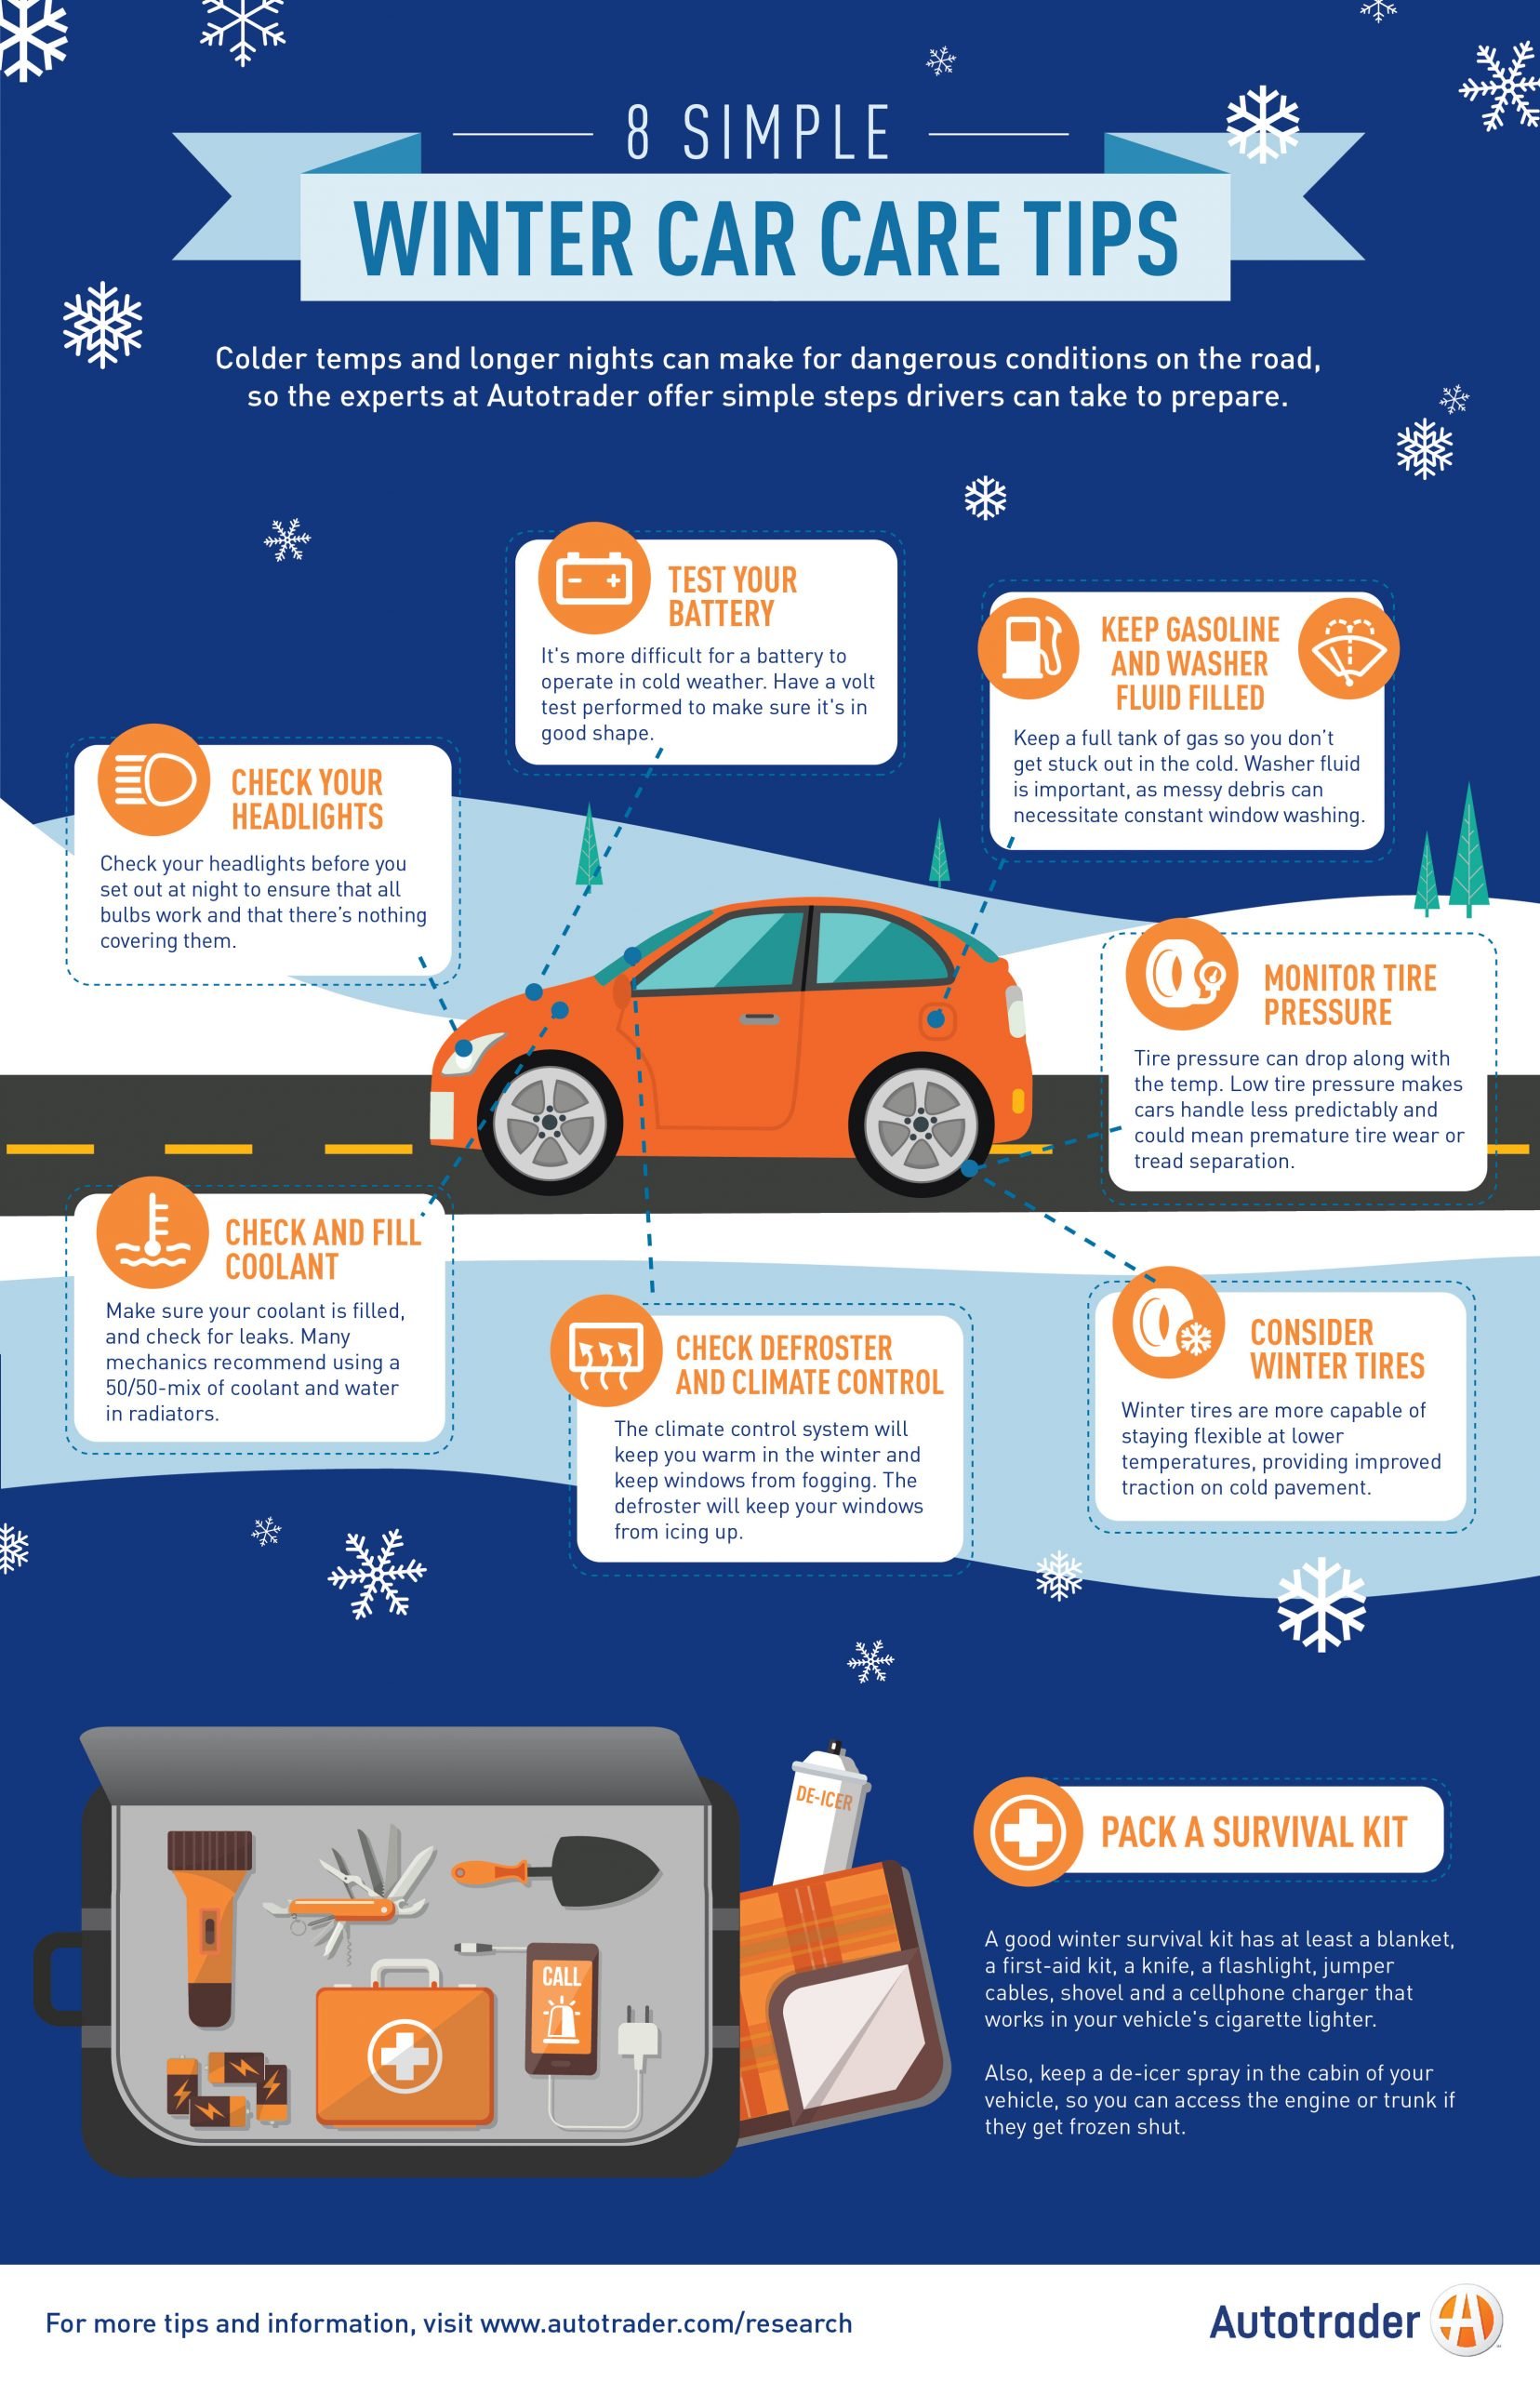 Know Before You Go: How to Prepare Your Car for Winter ...